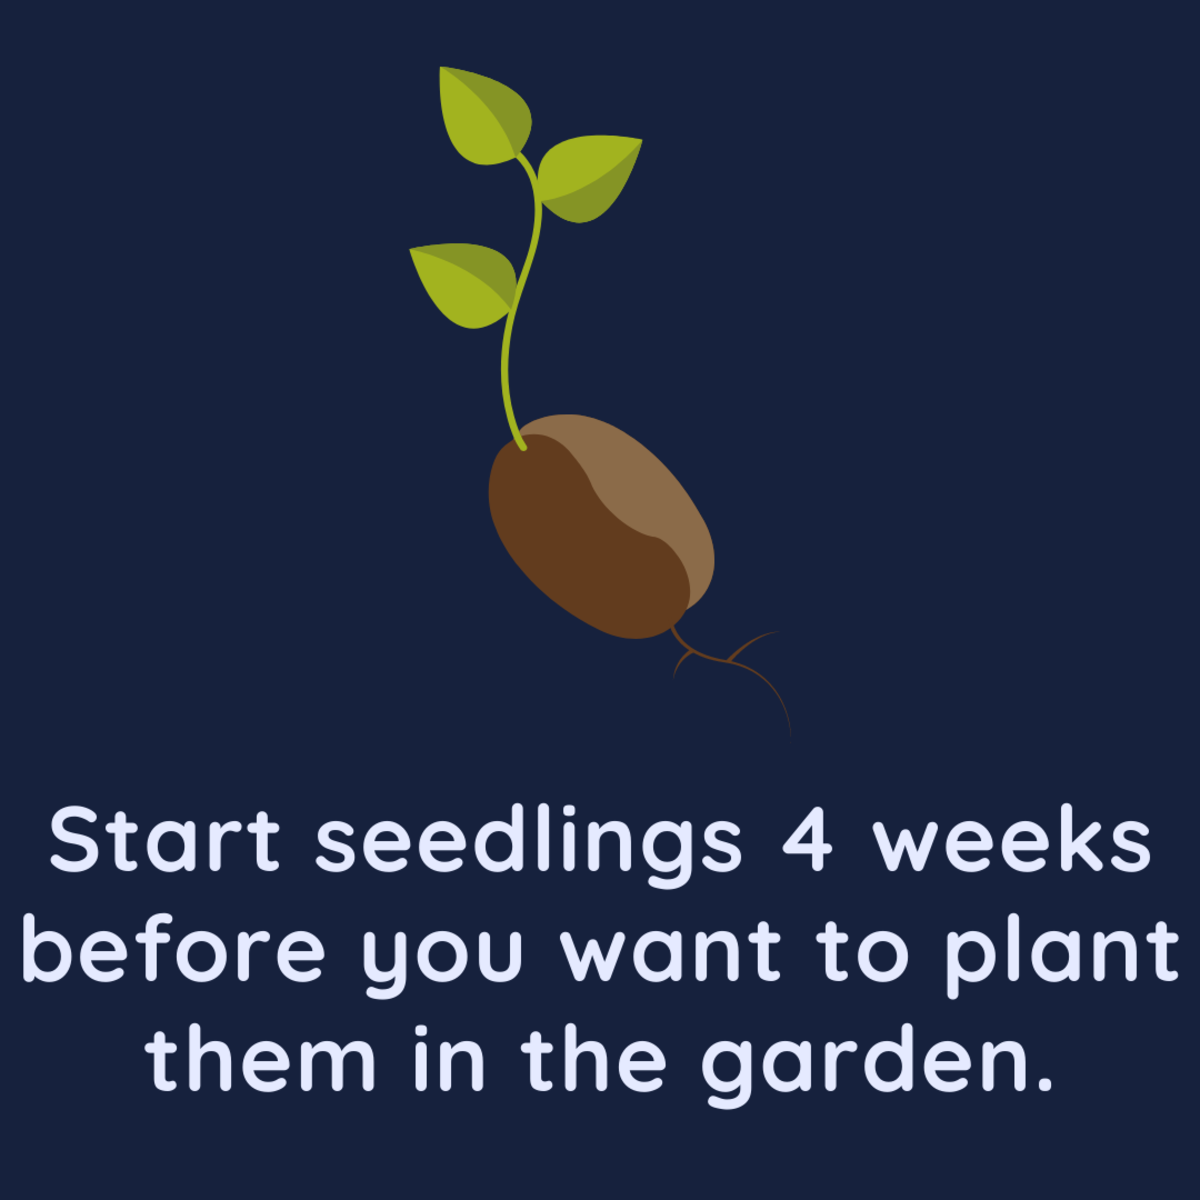 Seedlings should be started well before you want to transplant them into the garden.